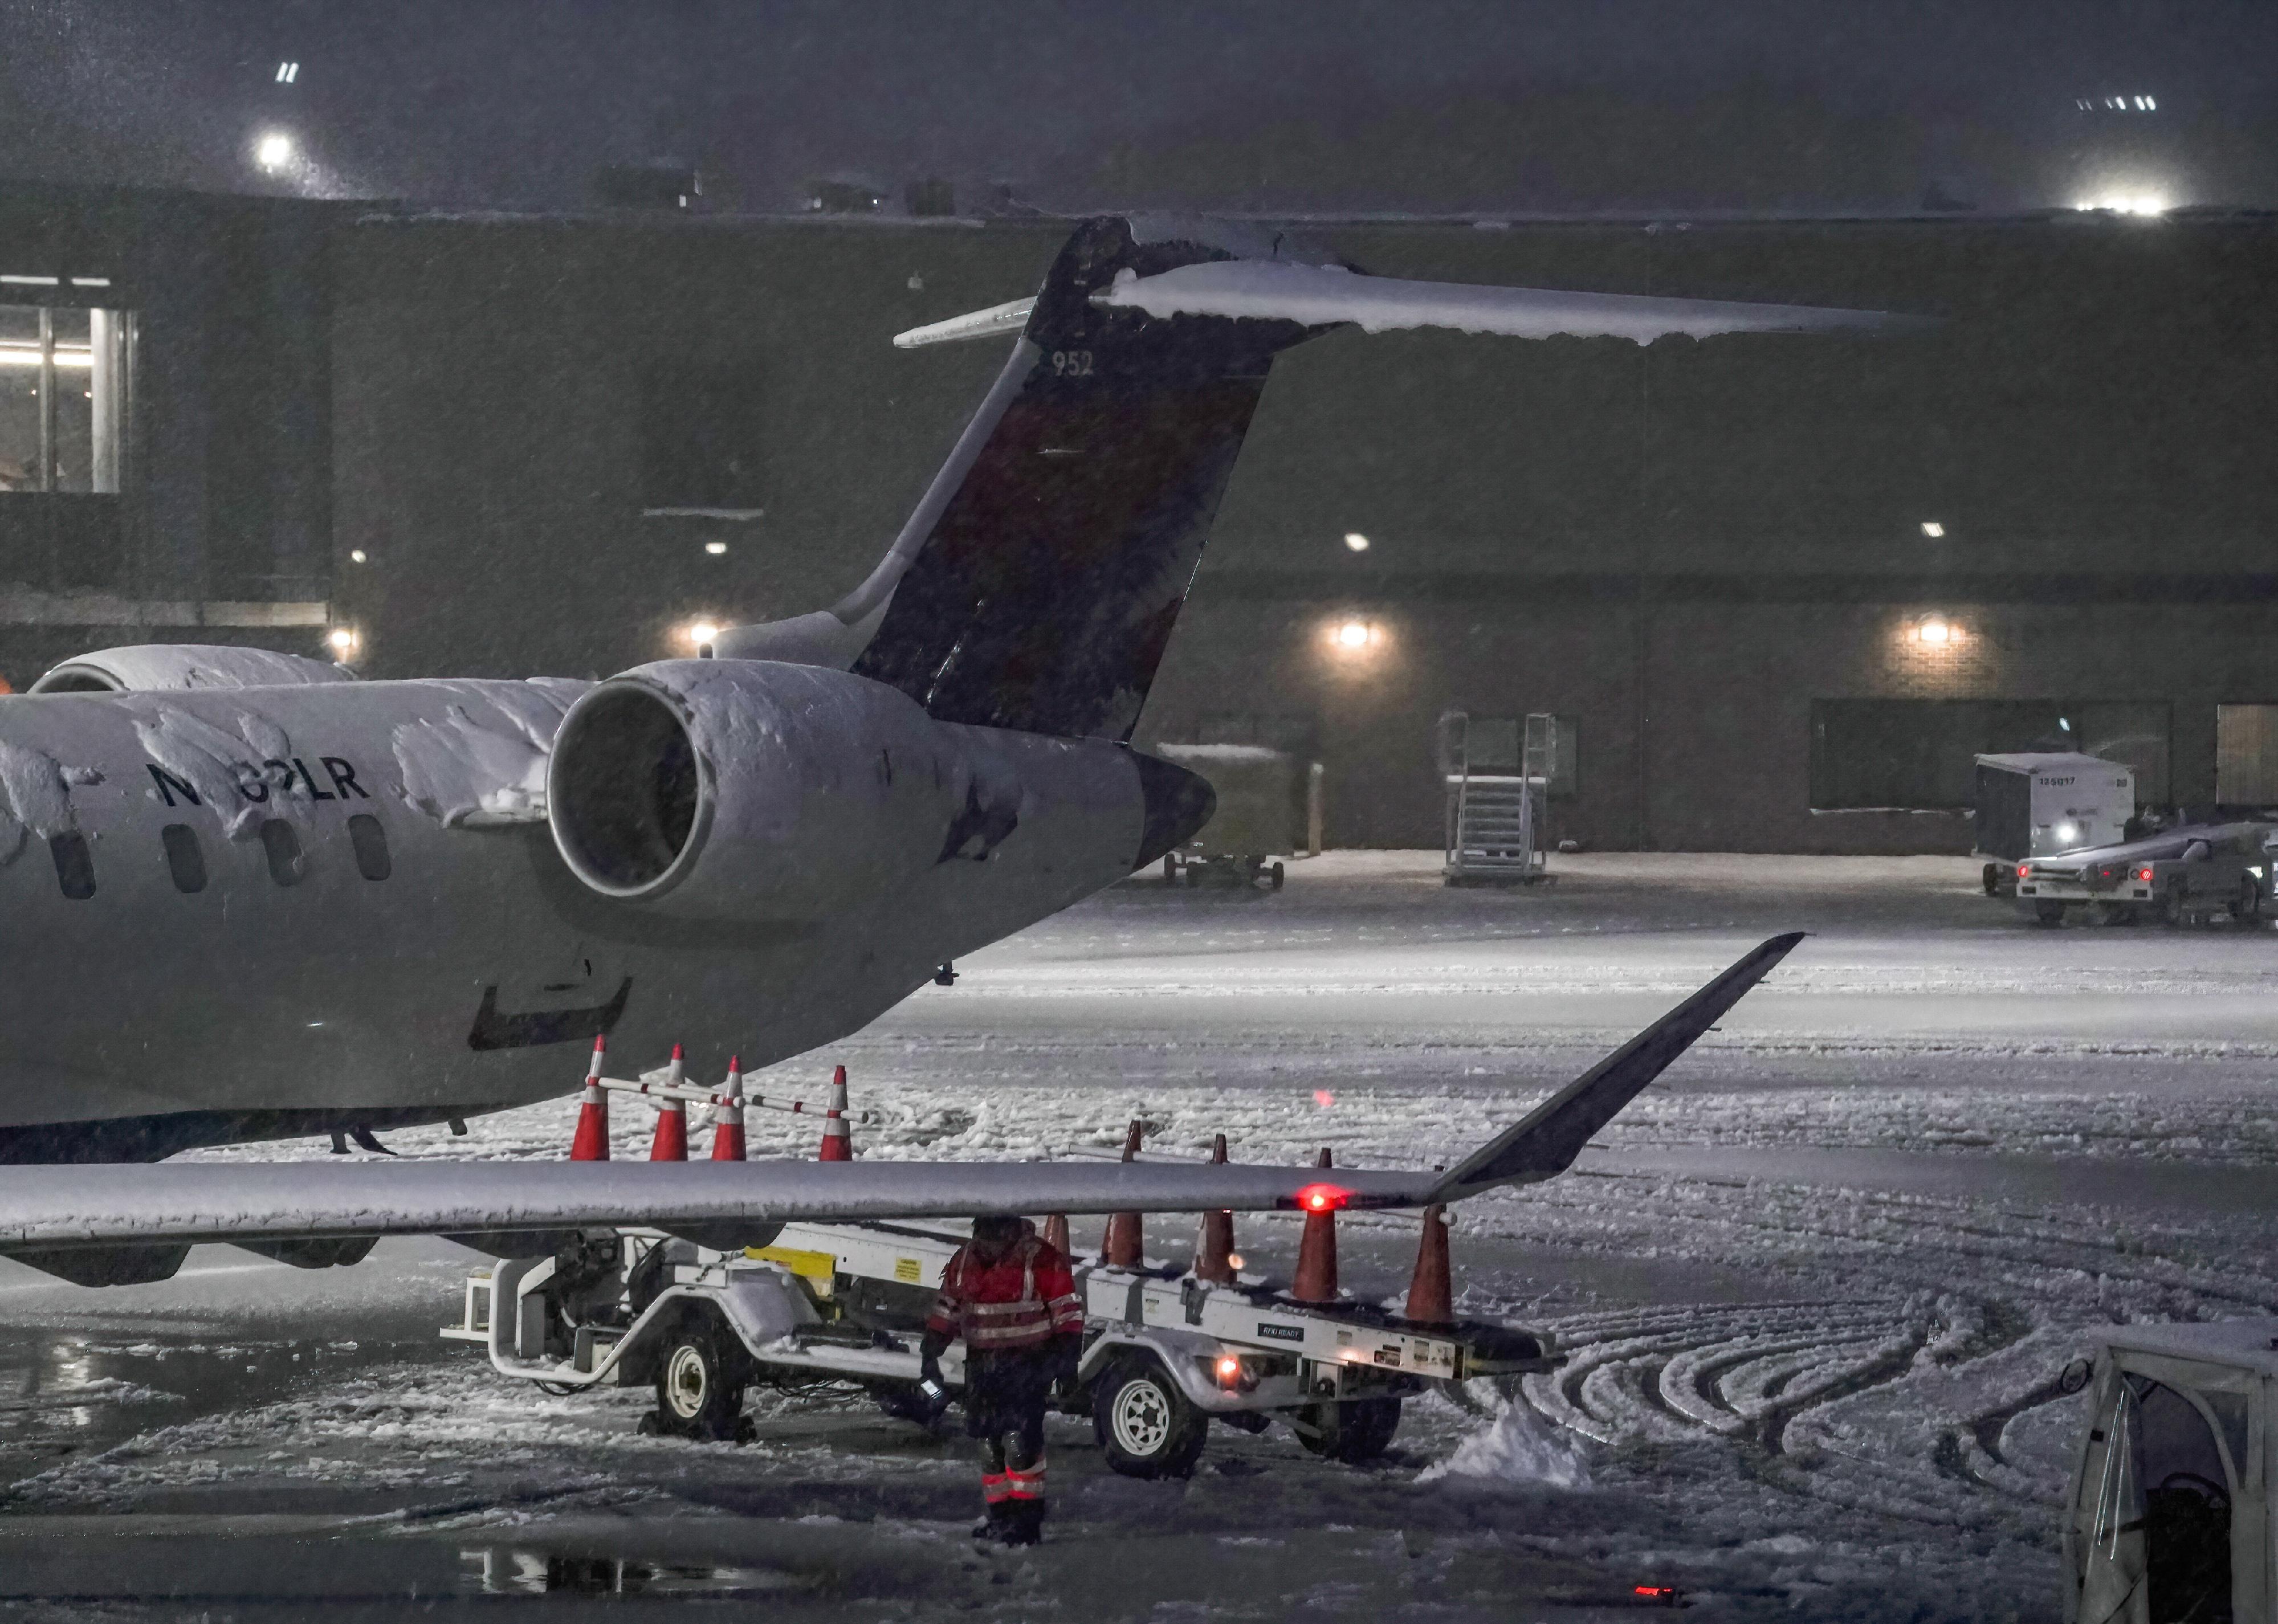 An airport employee working in a snowstorm next to an airplane.